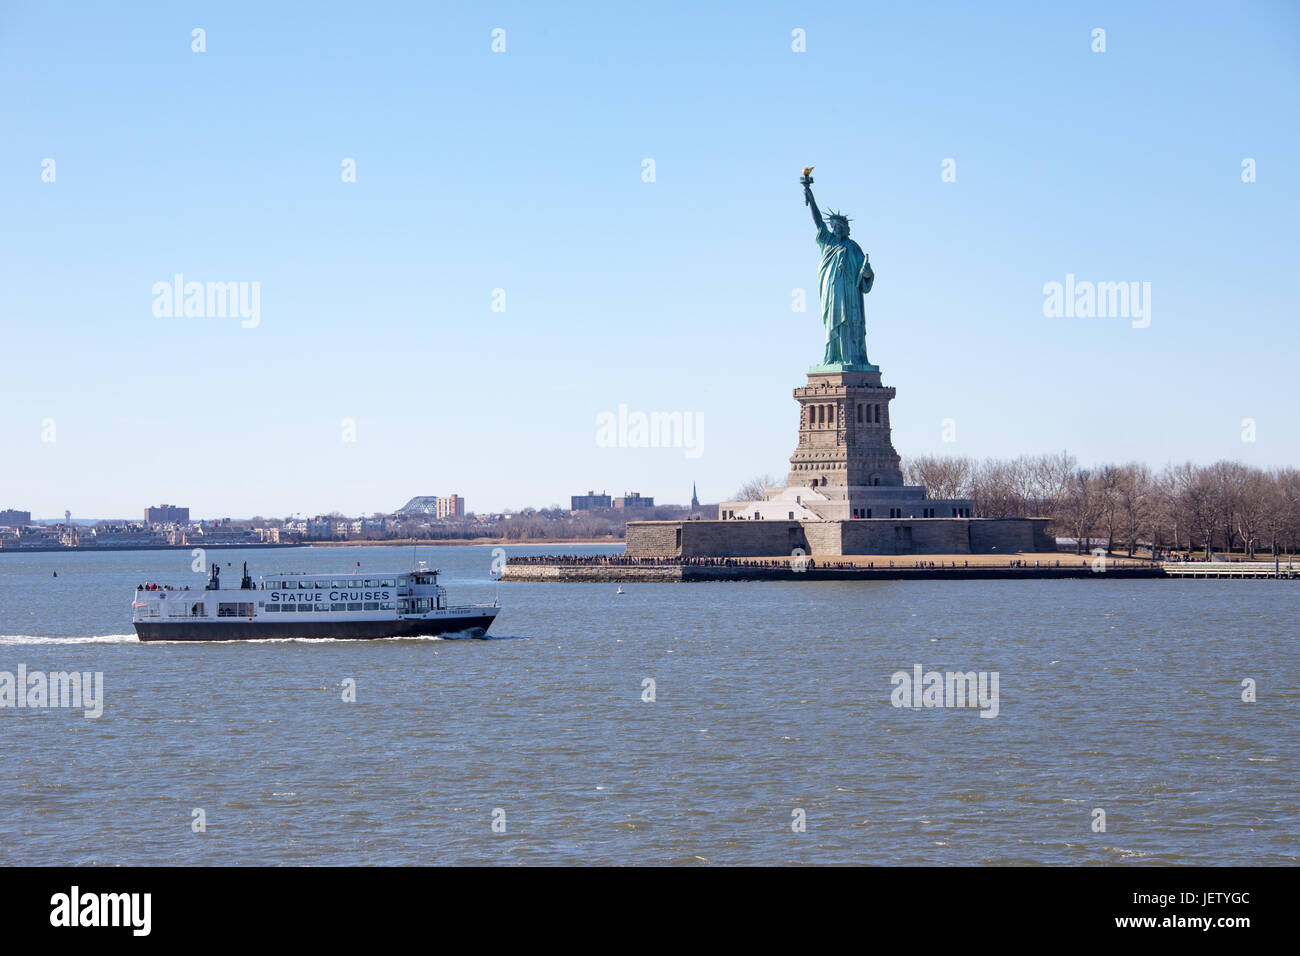 Statue Cruises Ferry and the Statue of Liberty, Stock Photo